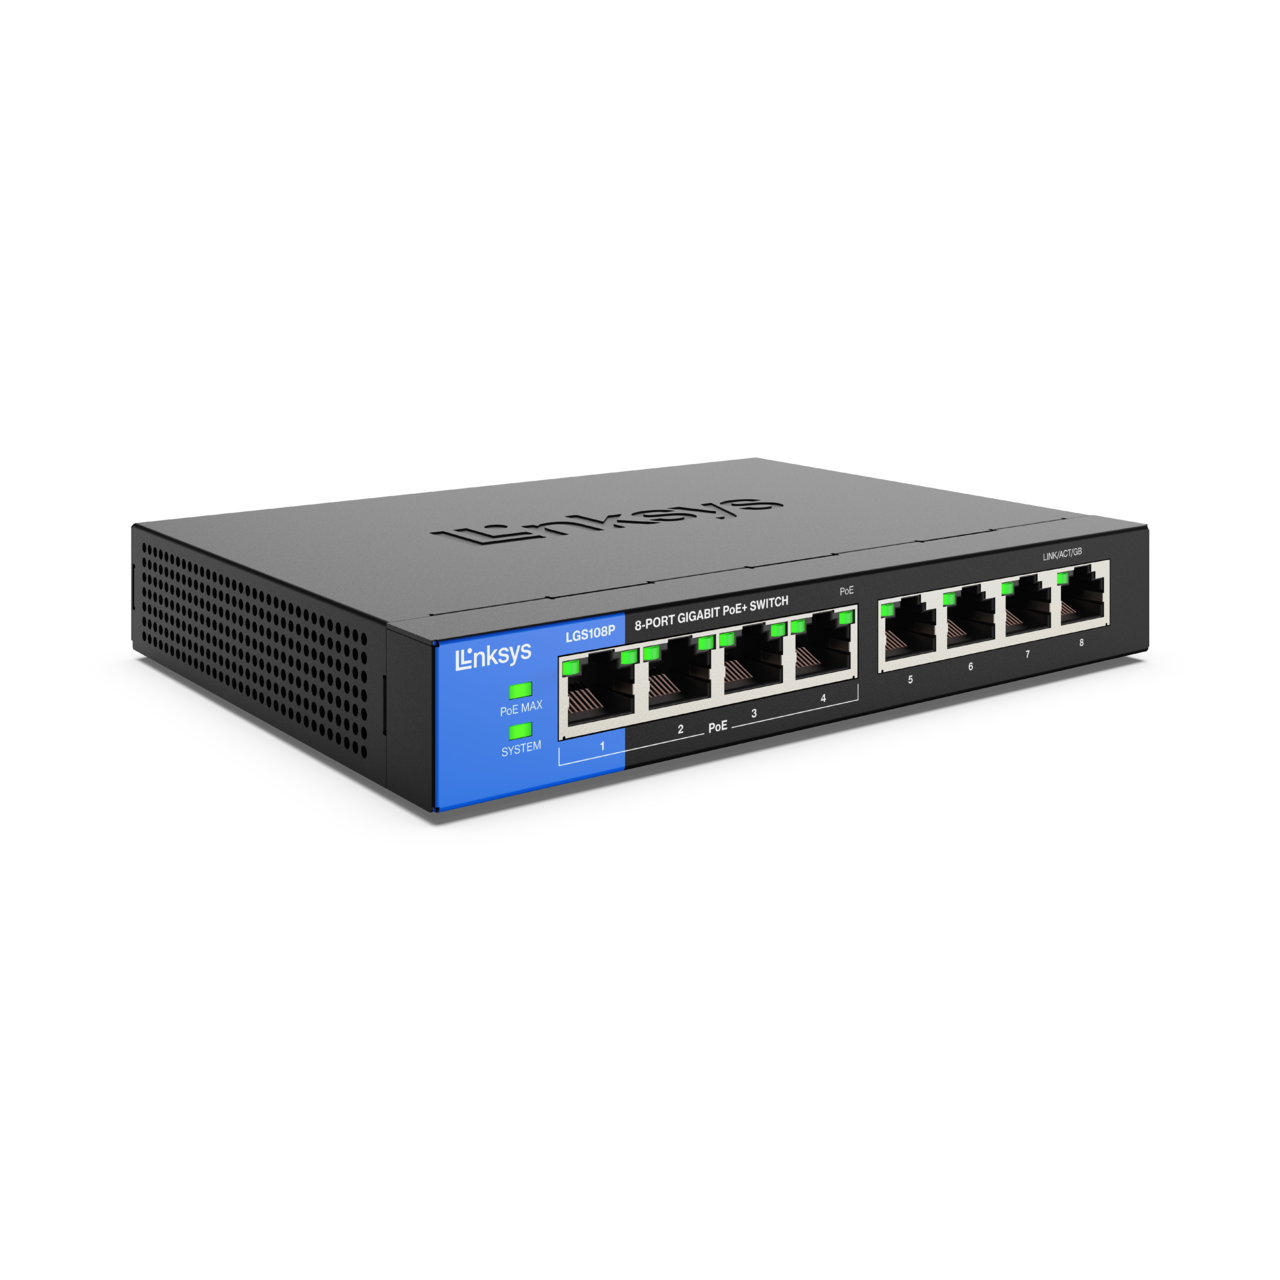 https://www.linksys.com/on/demandware.static/-/Sites-master-product-catalog/default/dw49d0bc2e/images/hi-res/7/135302071_LGS108P_Gallery_Refresh_Hero_WEB.png